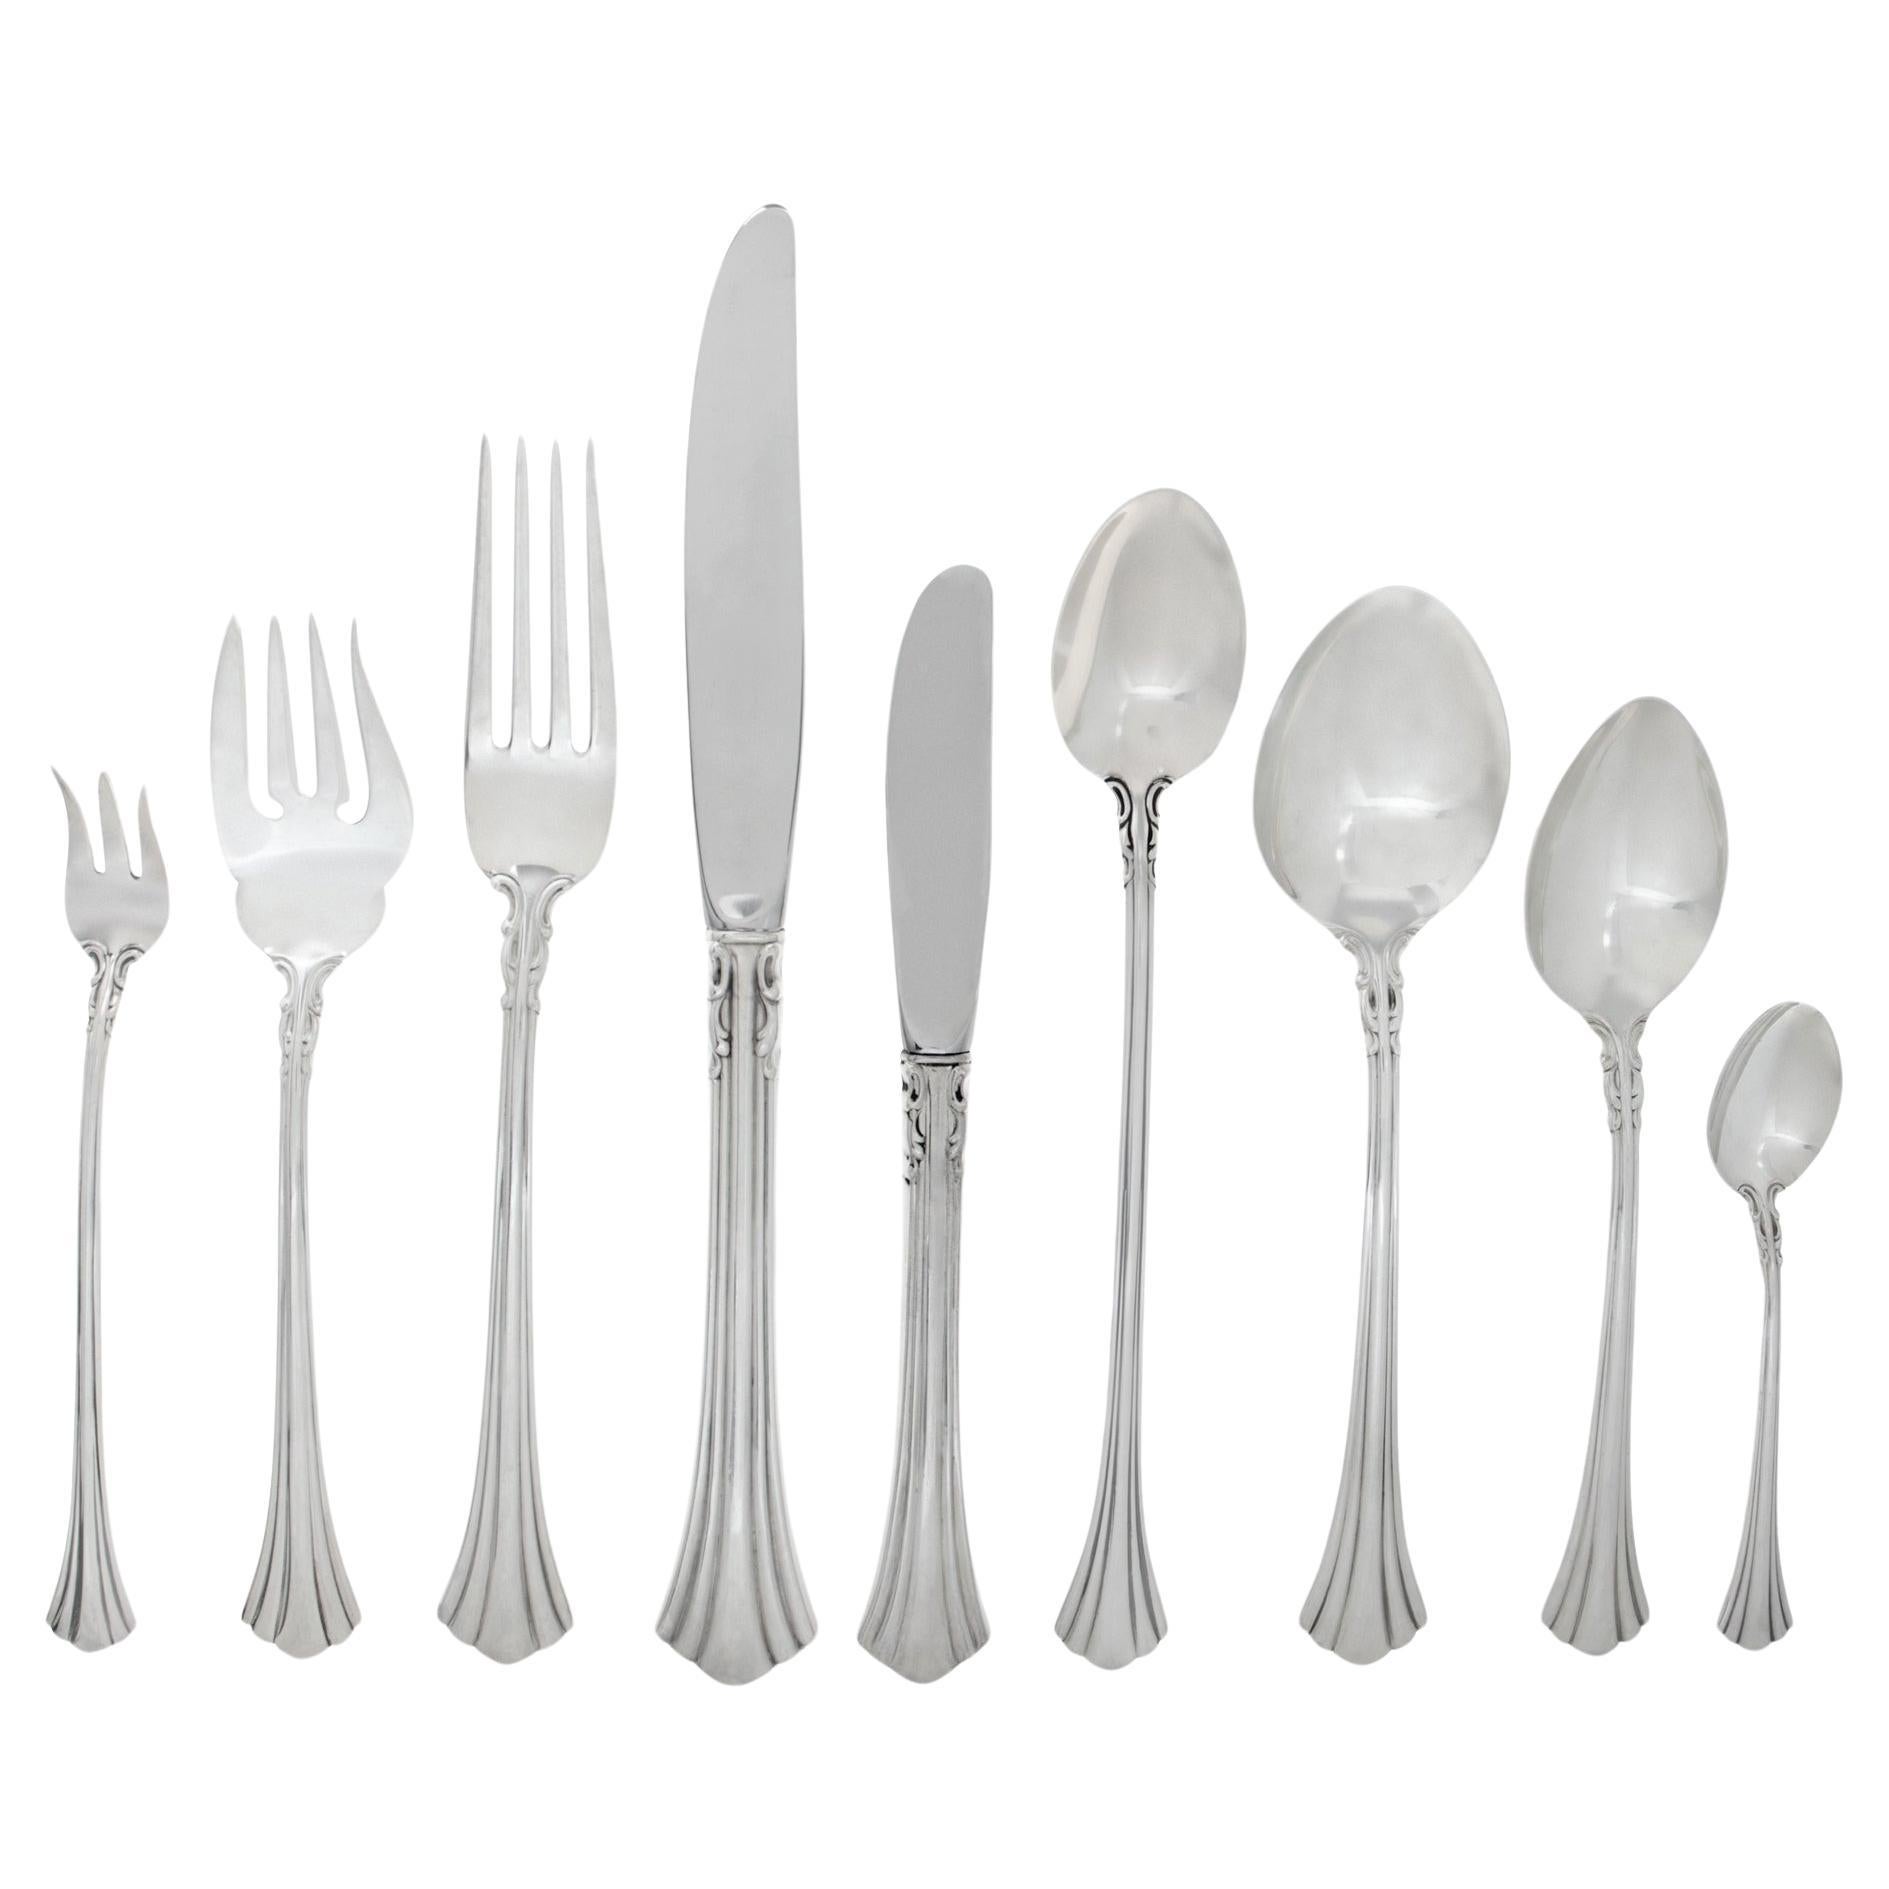 EIGHTEEN CENTURY sterling silver flatware set patented in 1971 by Reed & Barton